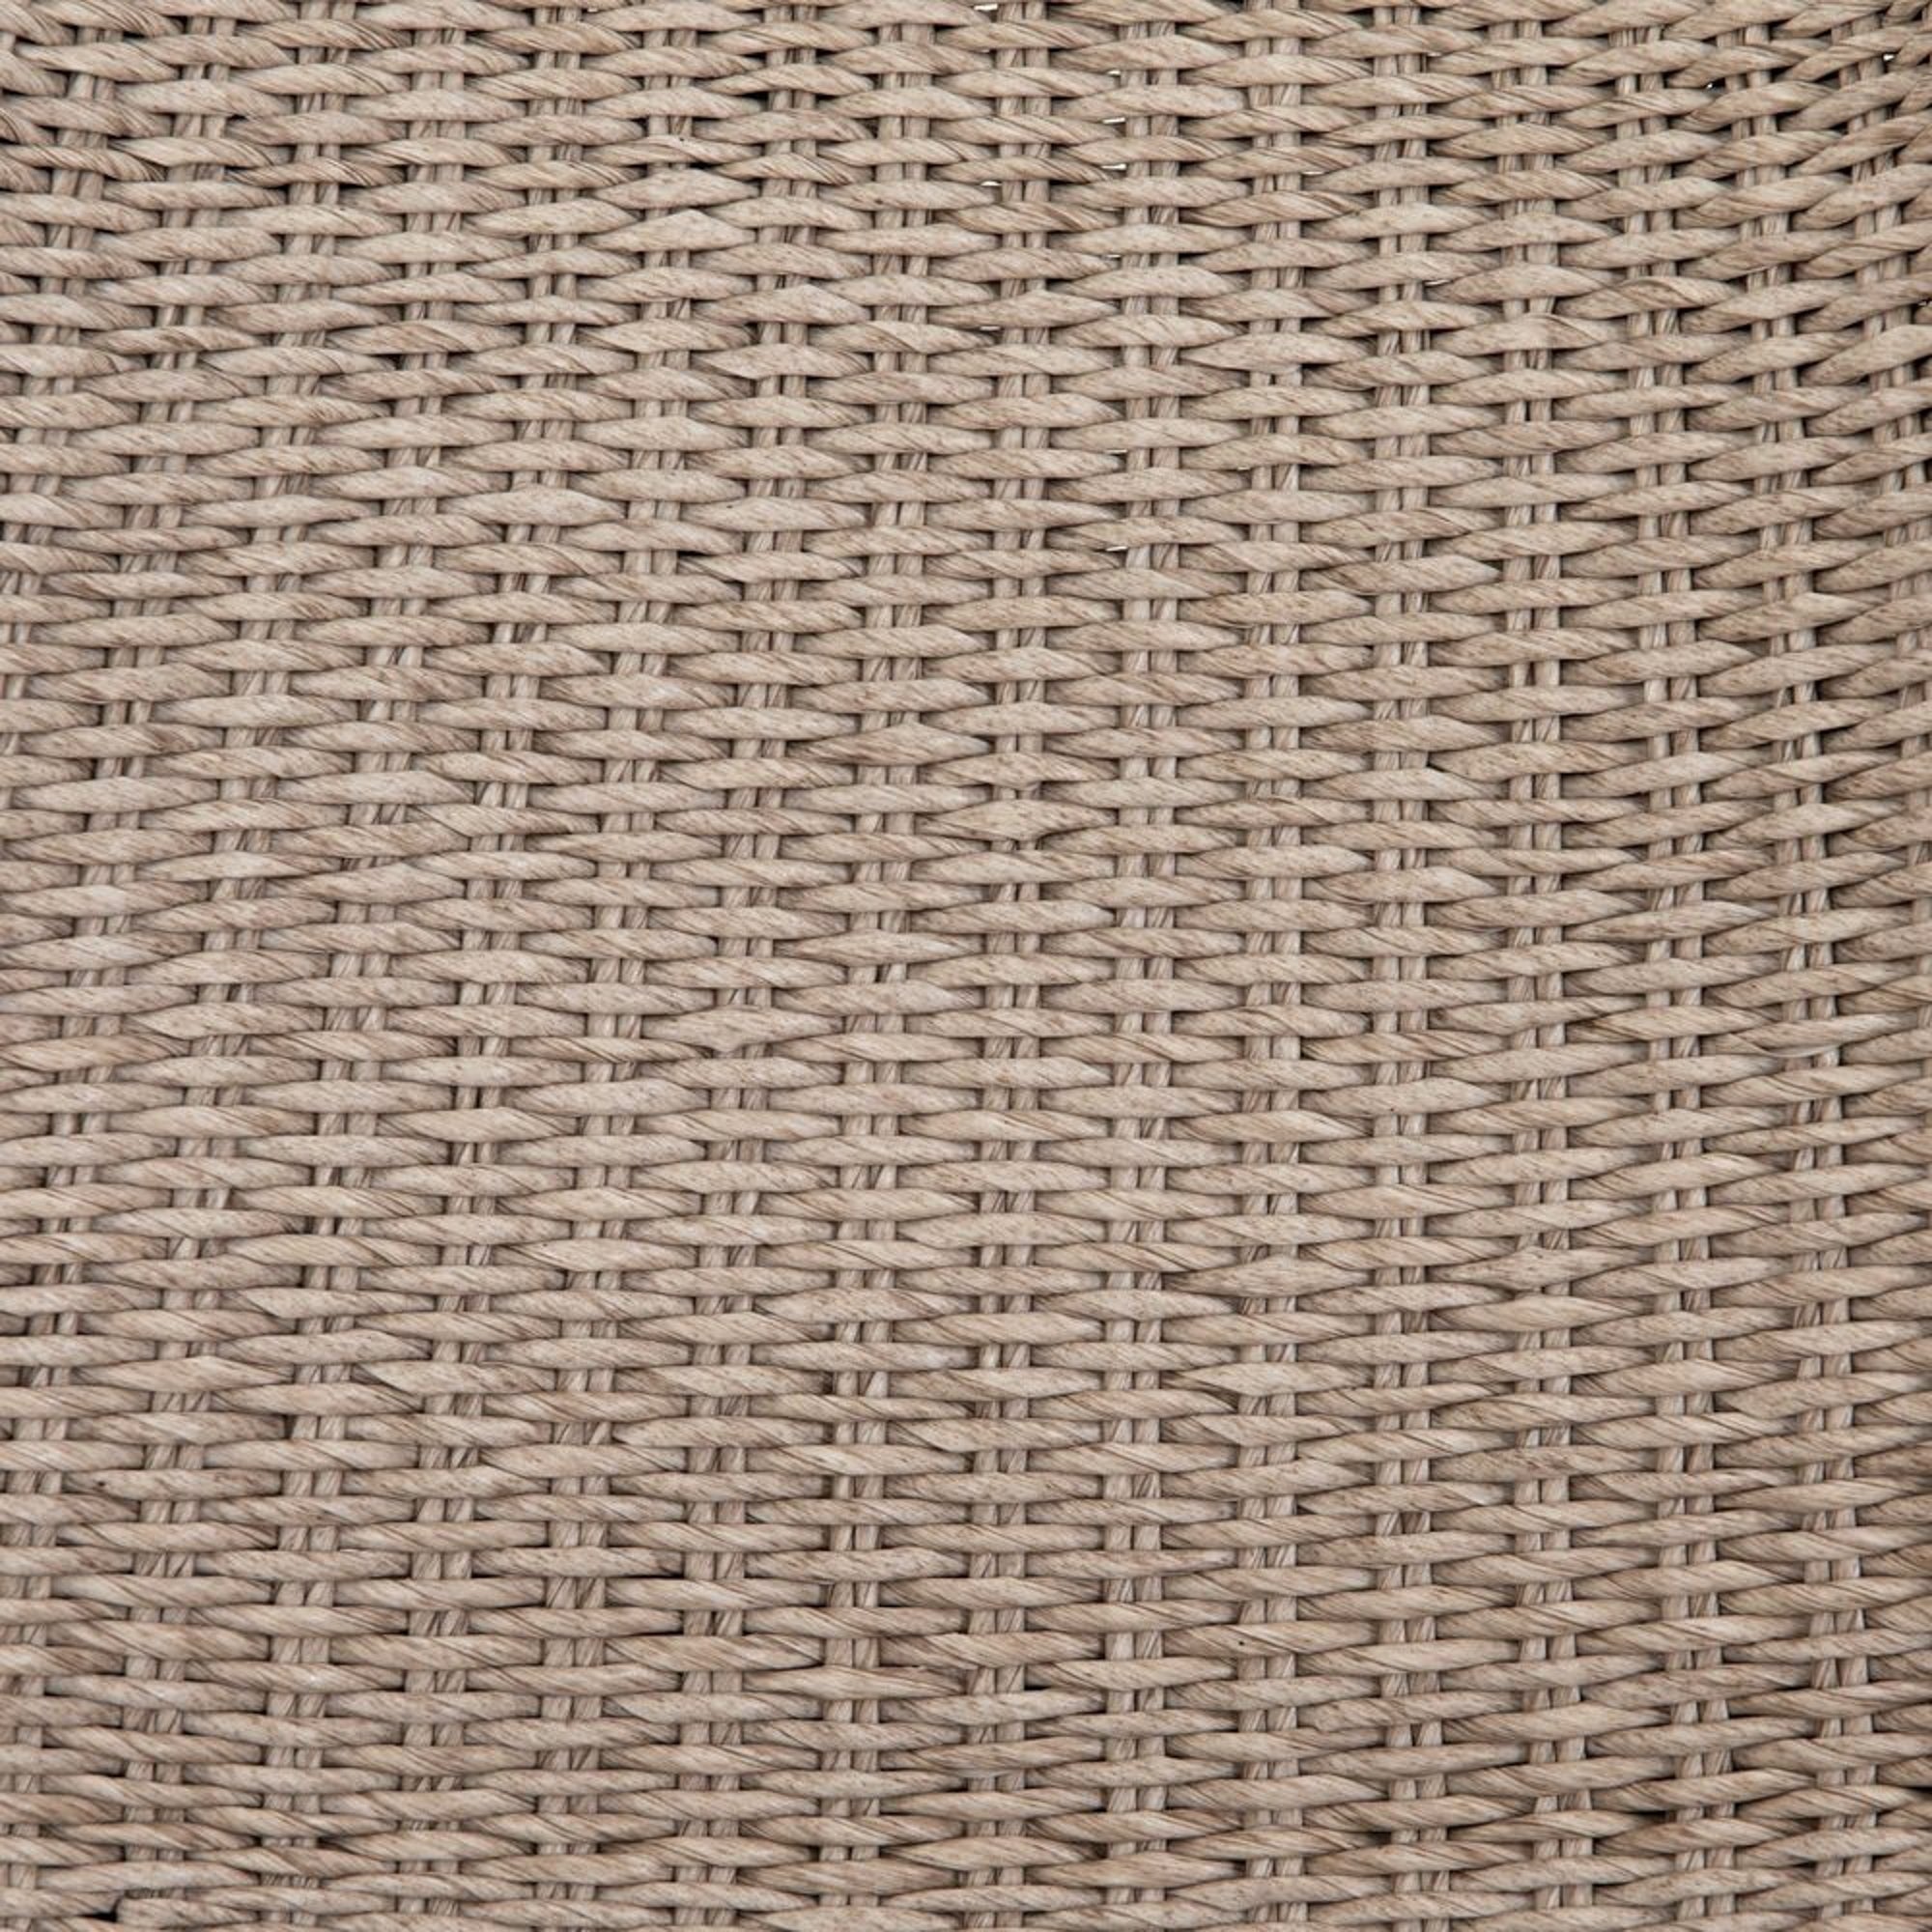 Detailed shot of the woven wicker on the Manila wicker weave beige indoor and outdoor dining chair